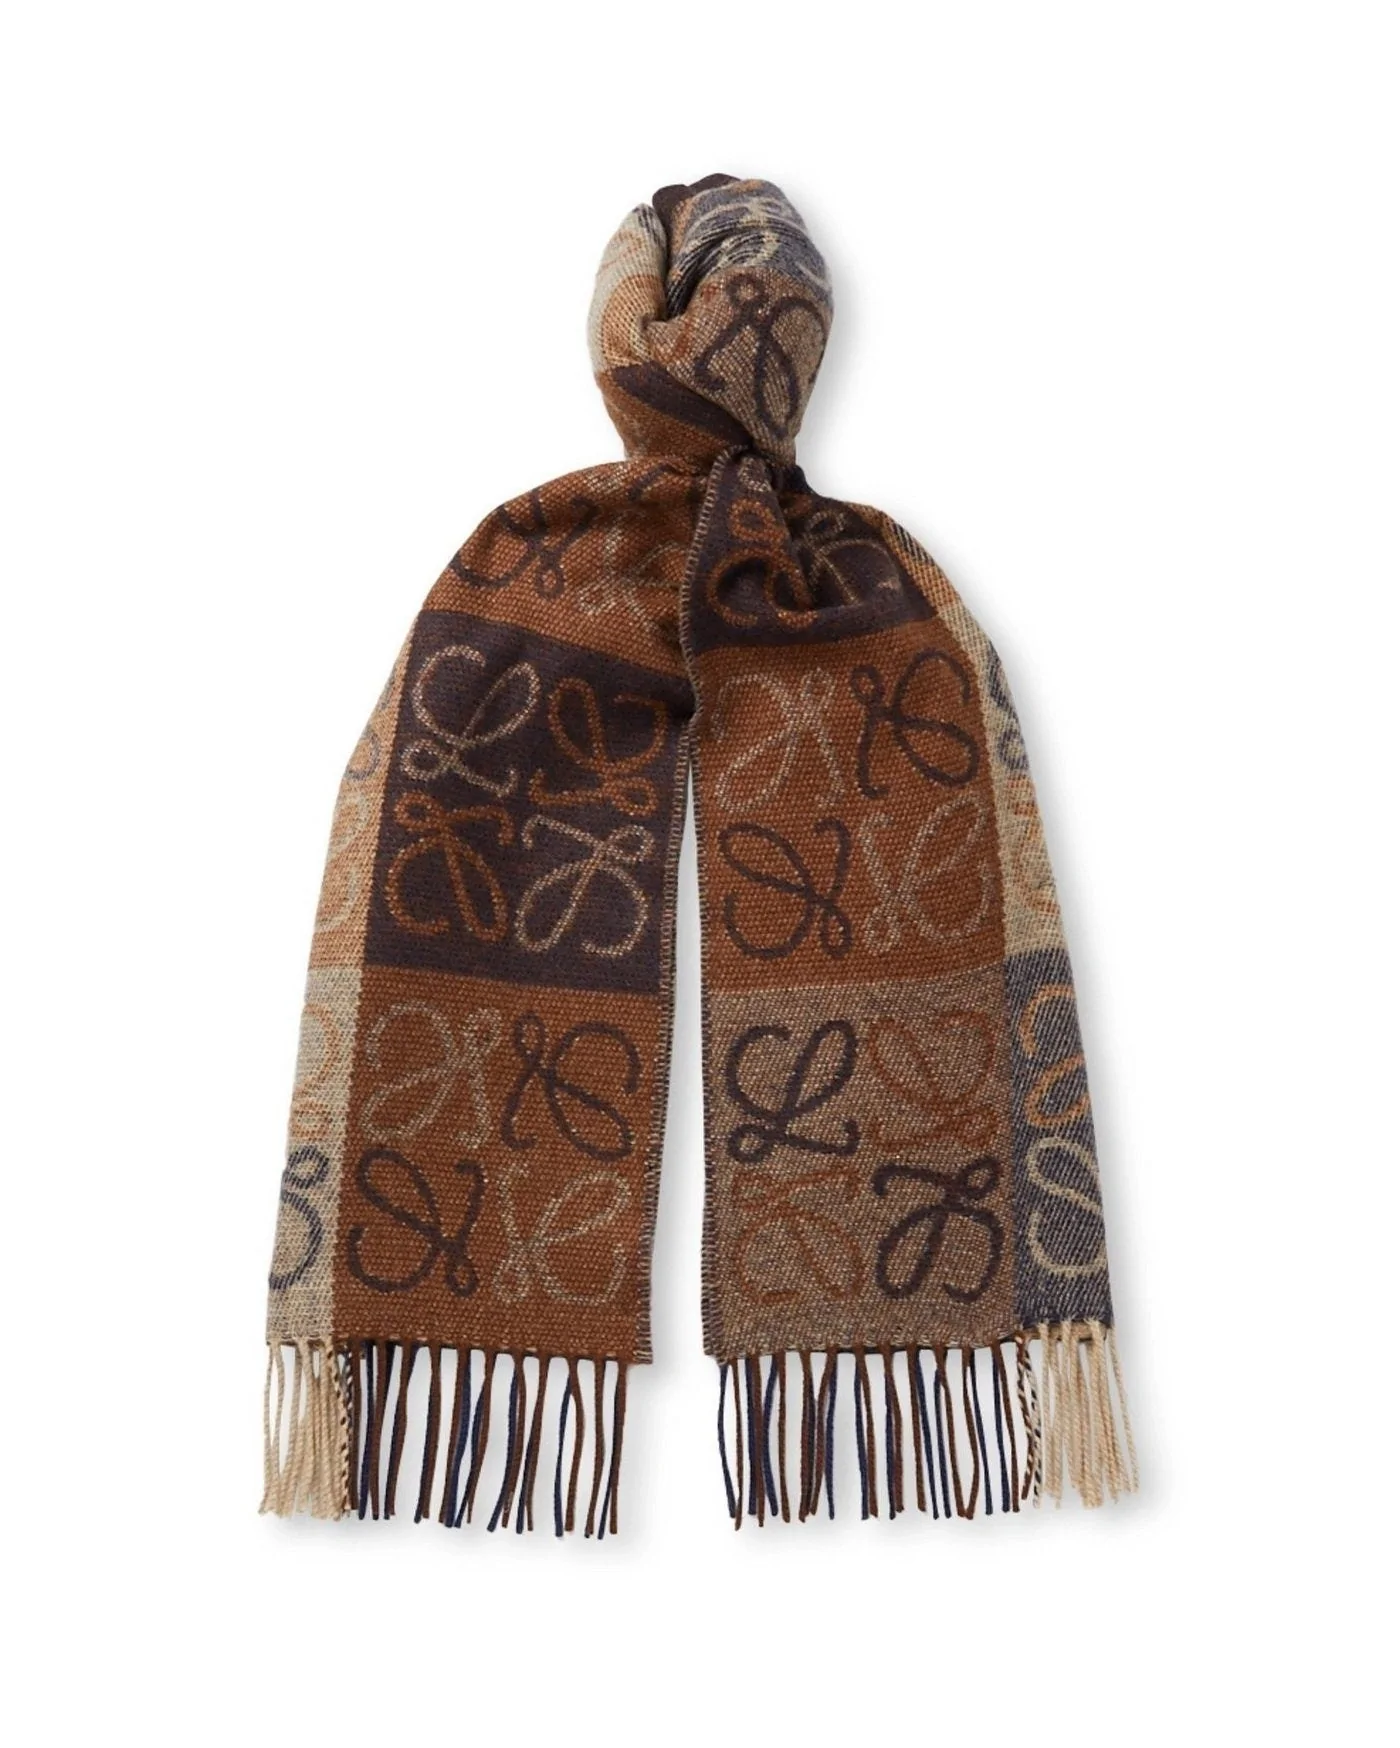 Loewe Fringed Wool and Cashmere-blend Jacquard Scarf, Navy/Brown